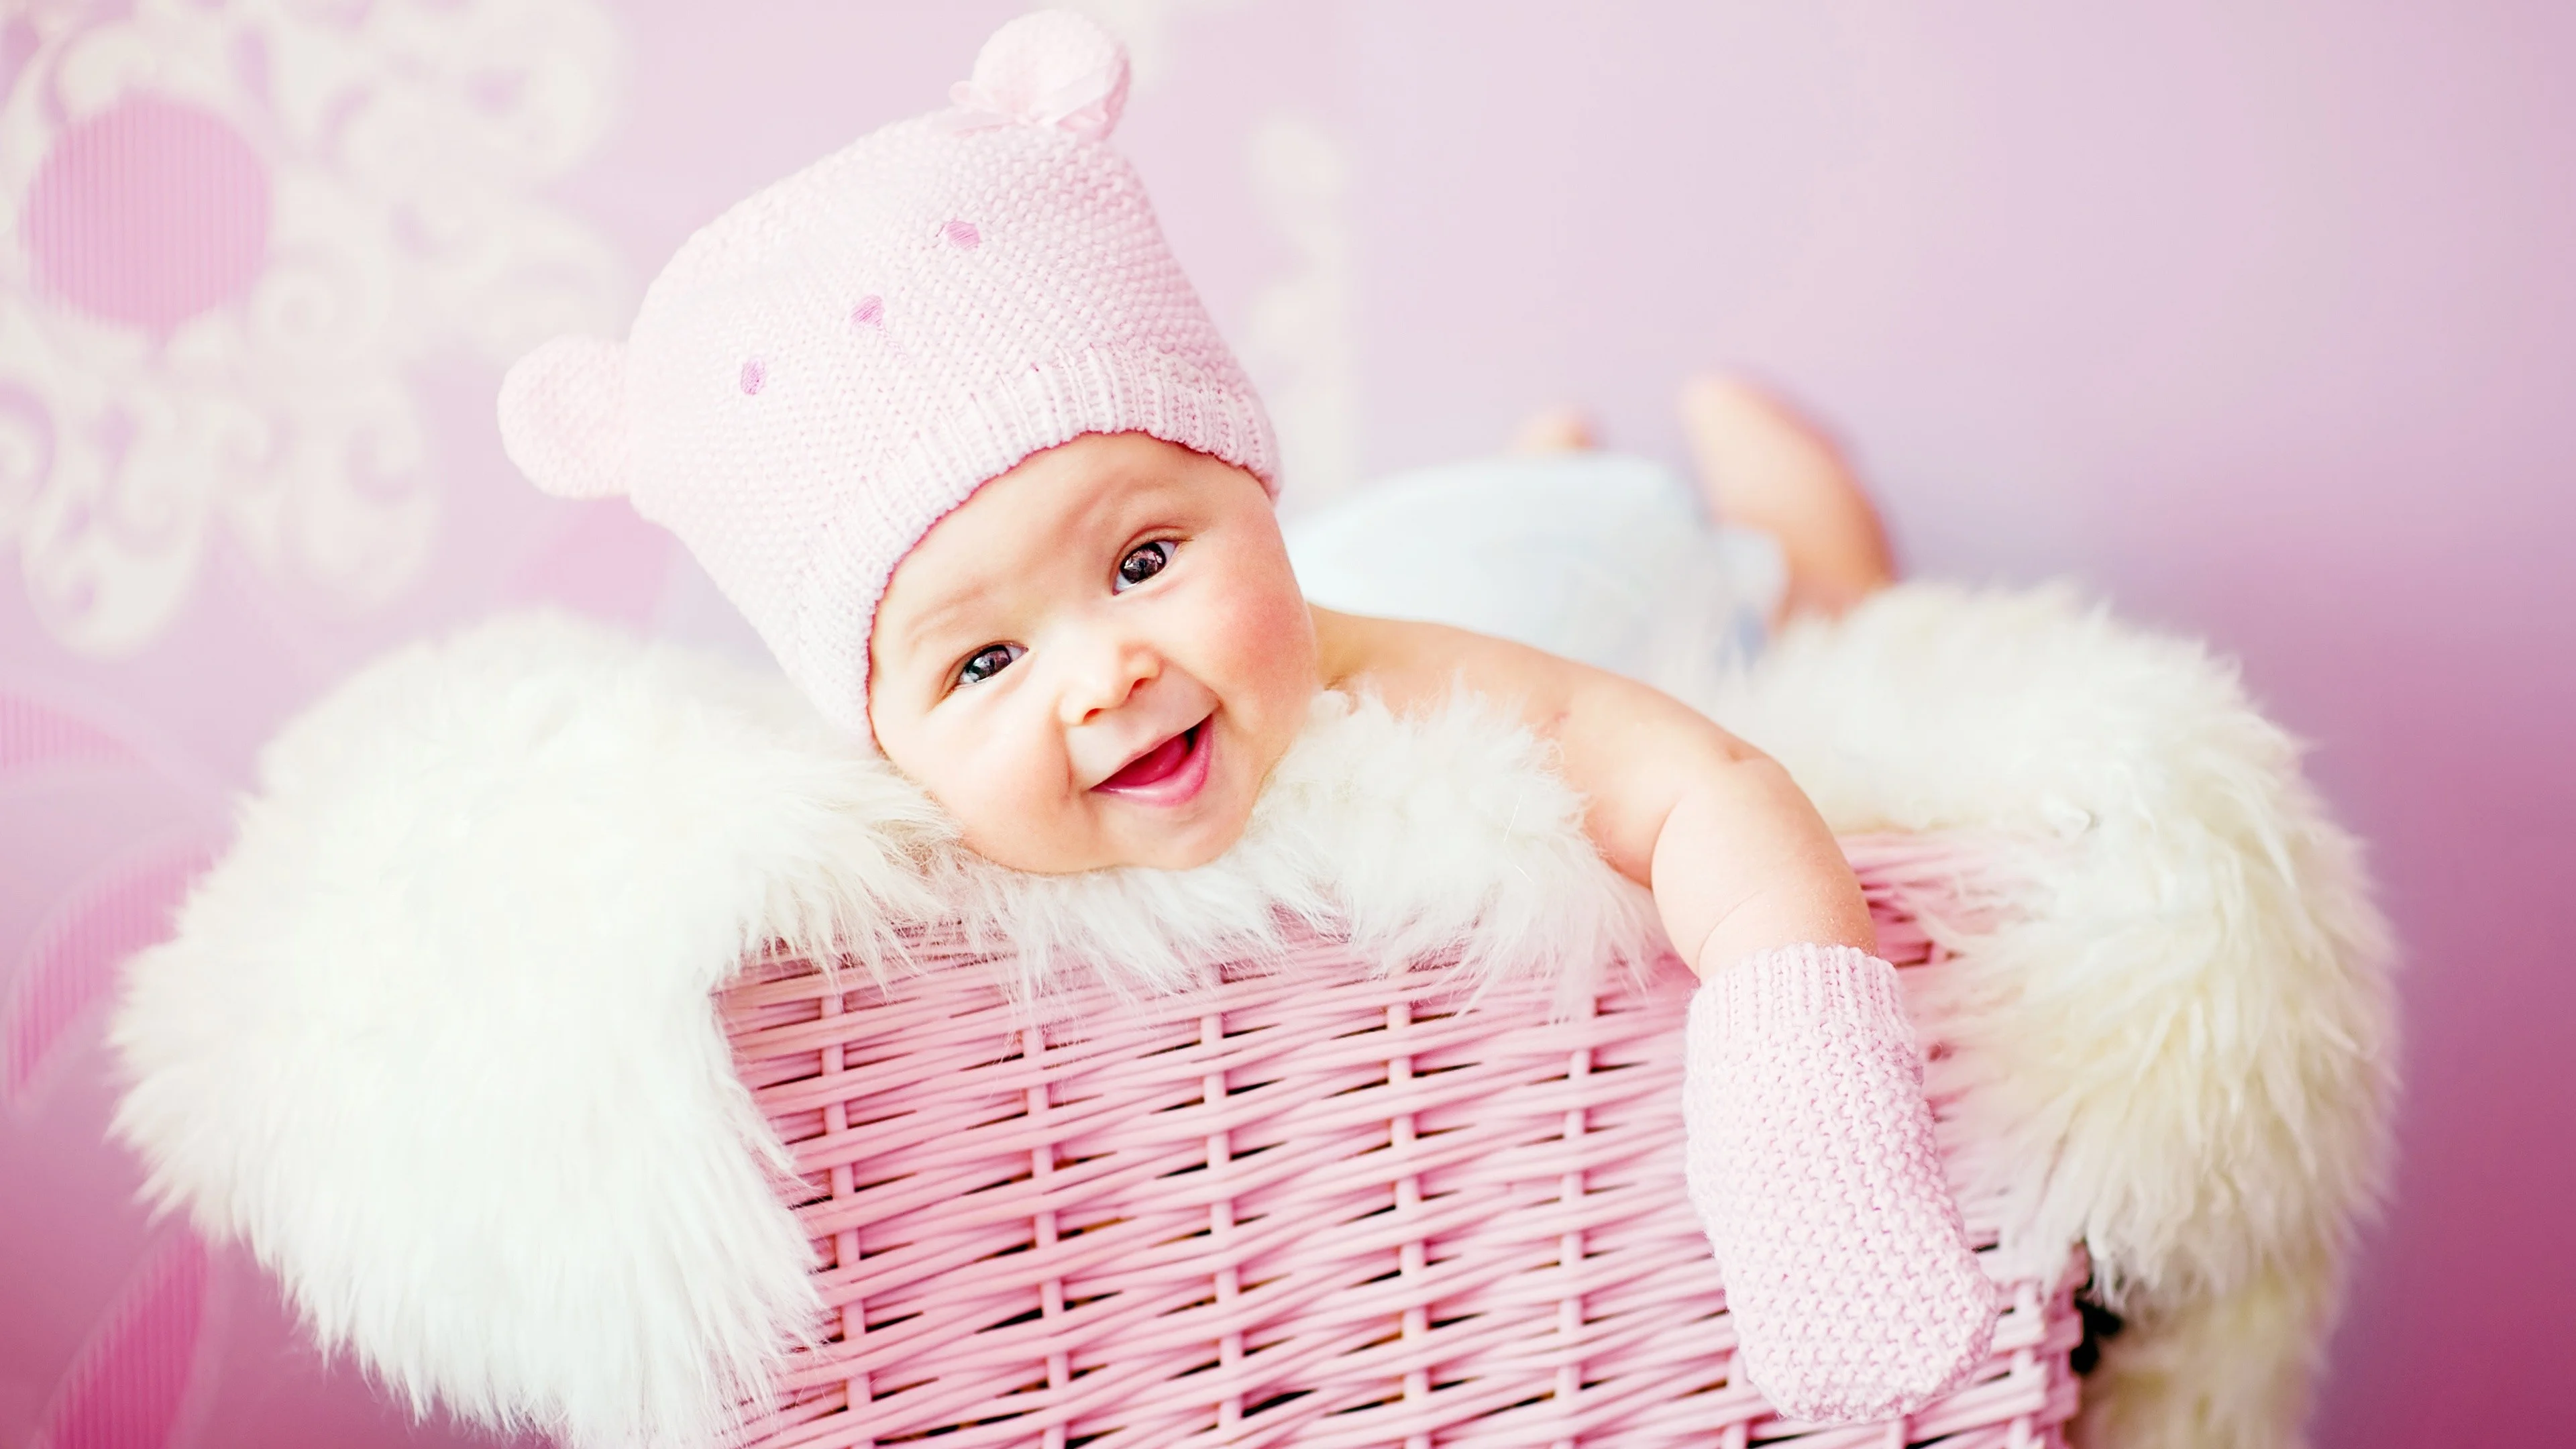 HD Cute Baby Wallpapers,Cute Baby Pictures,Cute Babies Pics,Cute Kids Wallpapers,Cute Baby Girls Wallpapers in HD High Quality Resolutions – Page 2